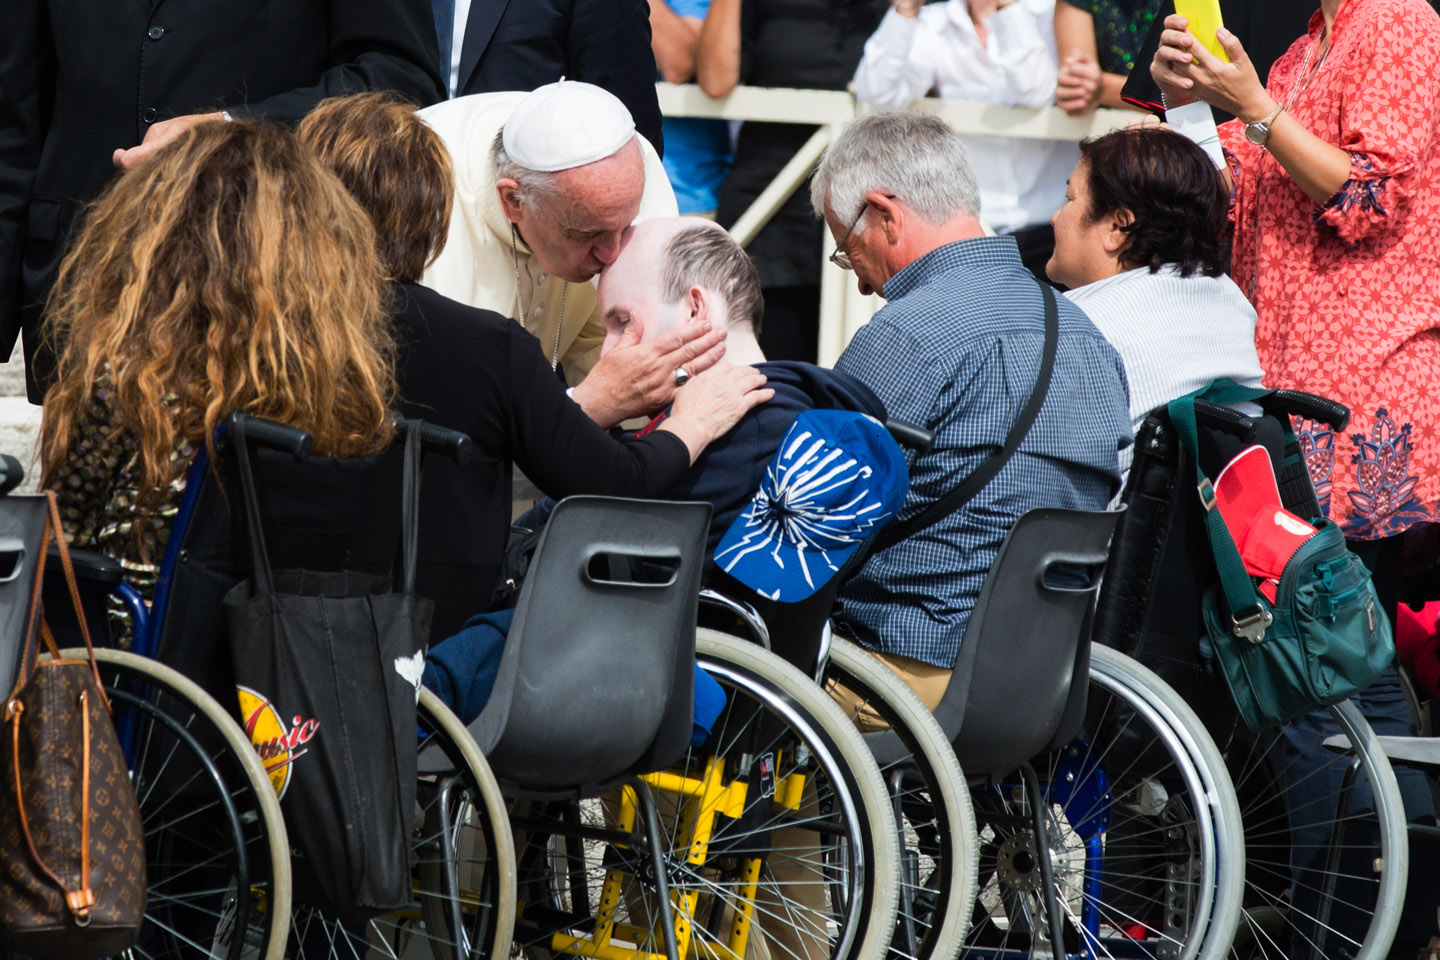 Pope Francis blesses the sick